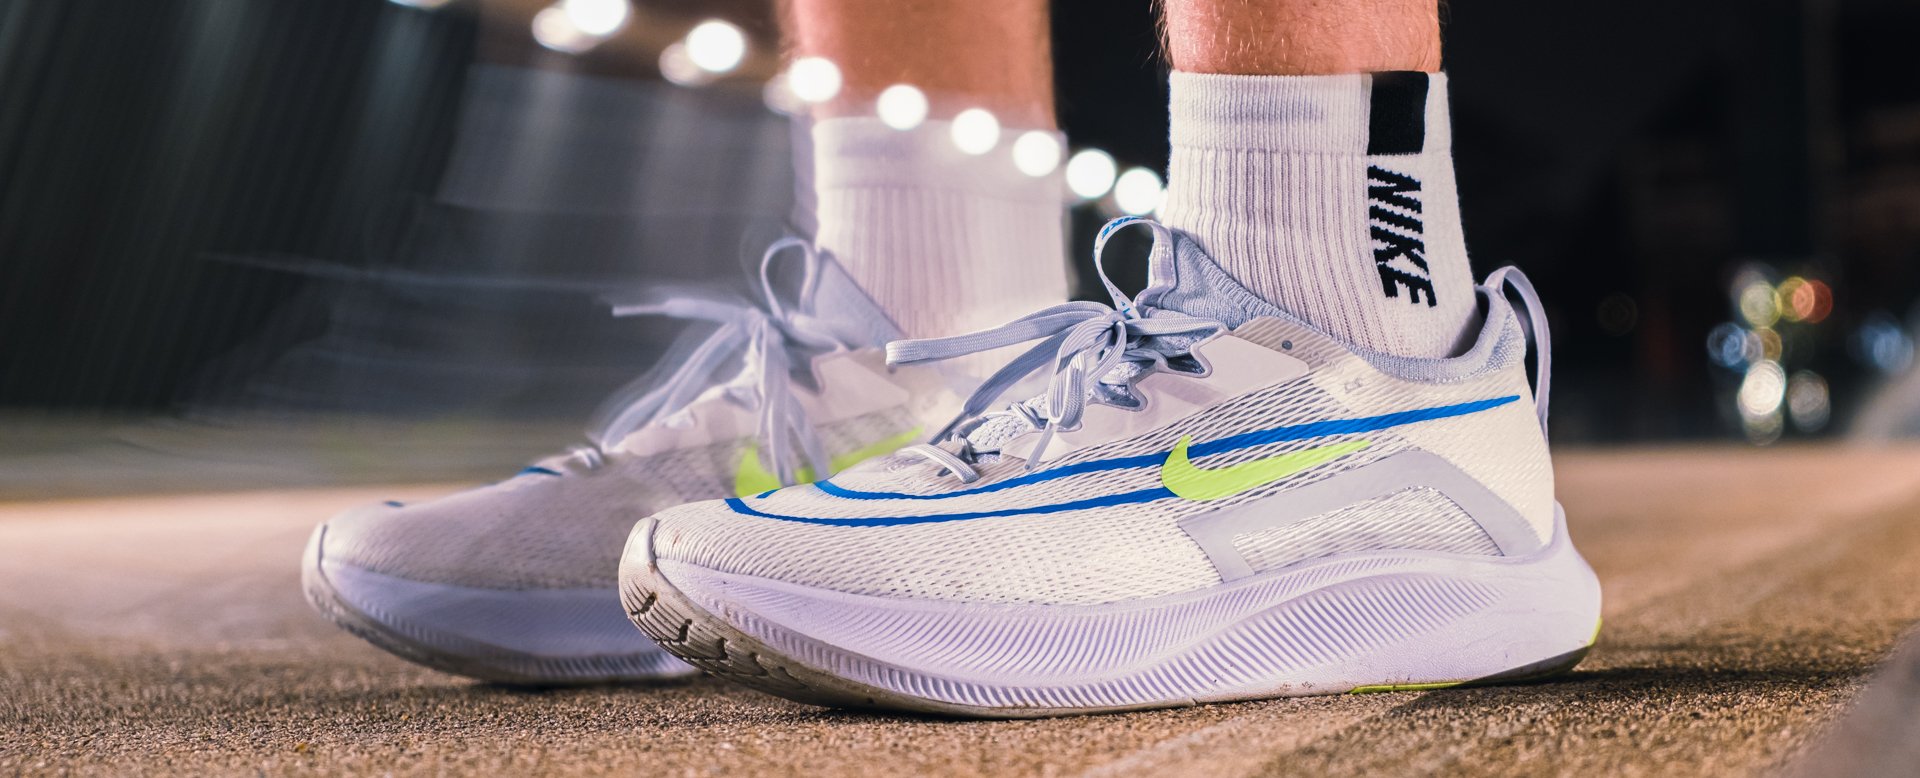 Nike Zoom Fly 4 - A Vaporfly daily miles -